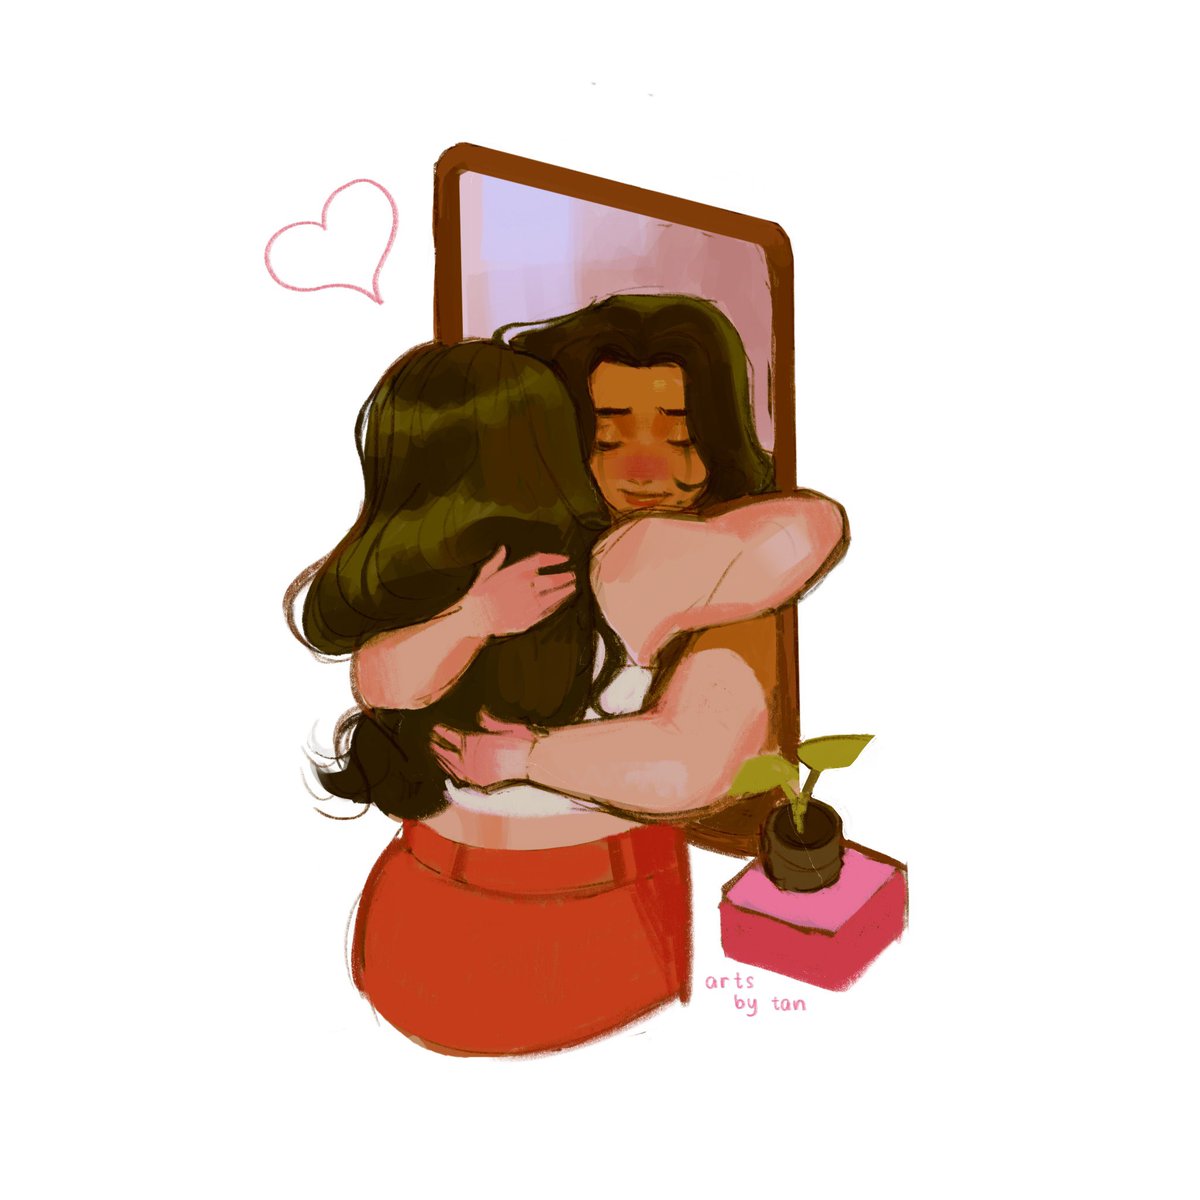 happy valentine’s day and remember to love yourself as well #artph